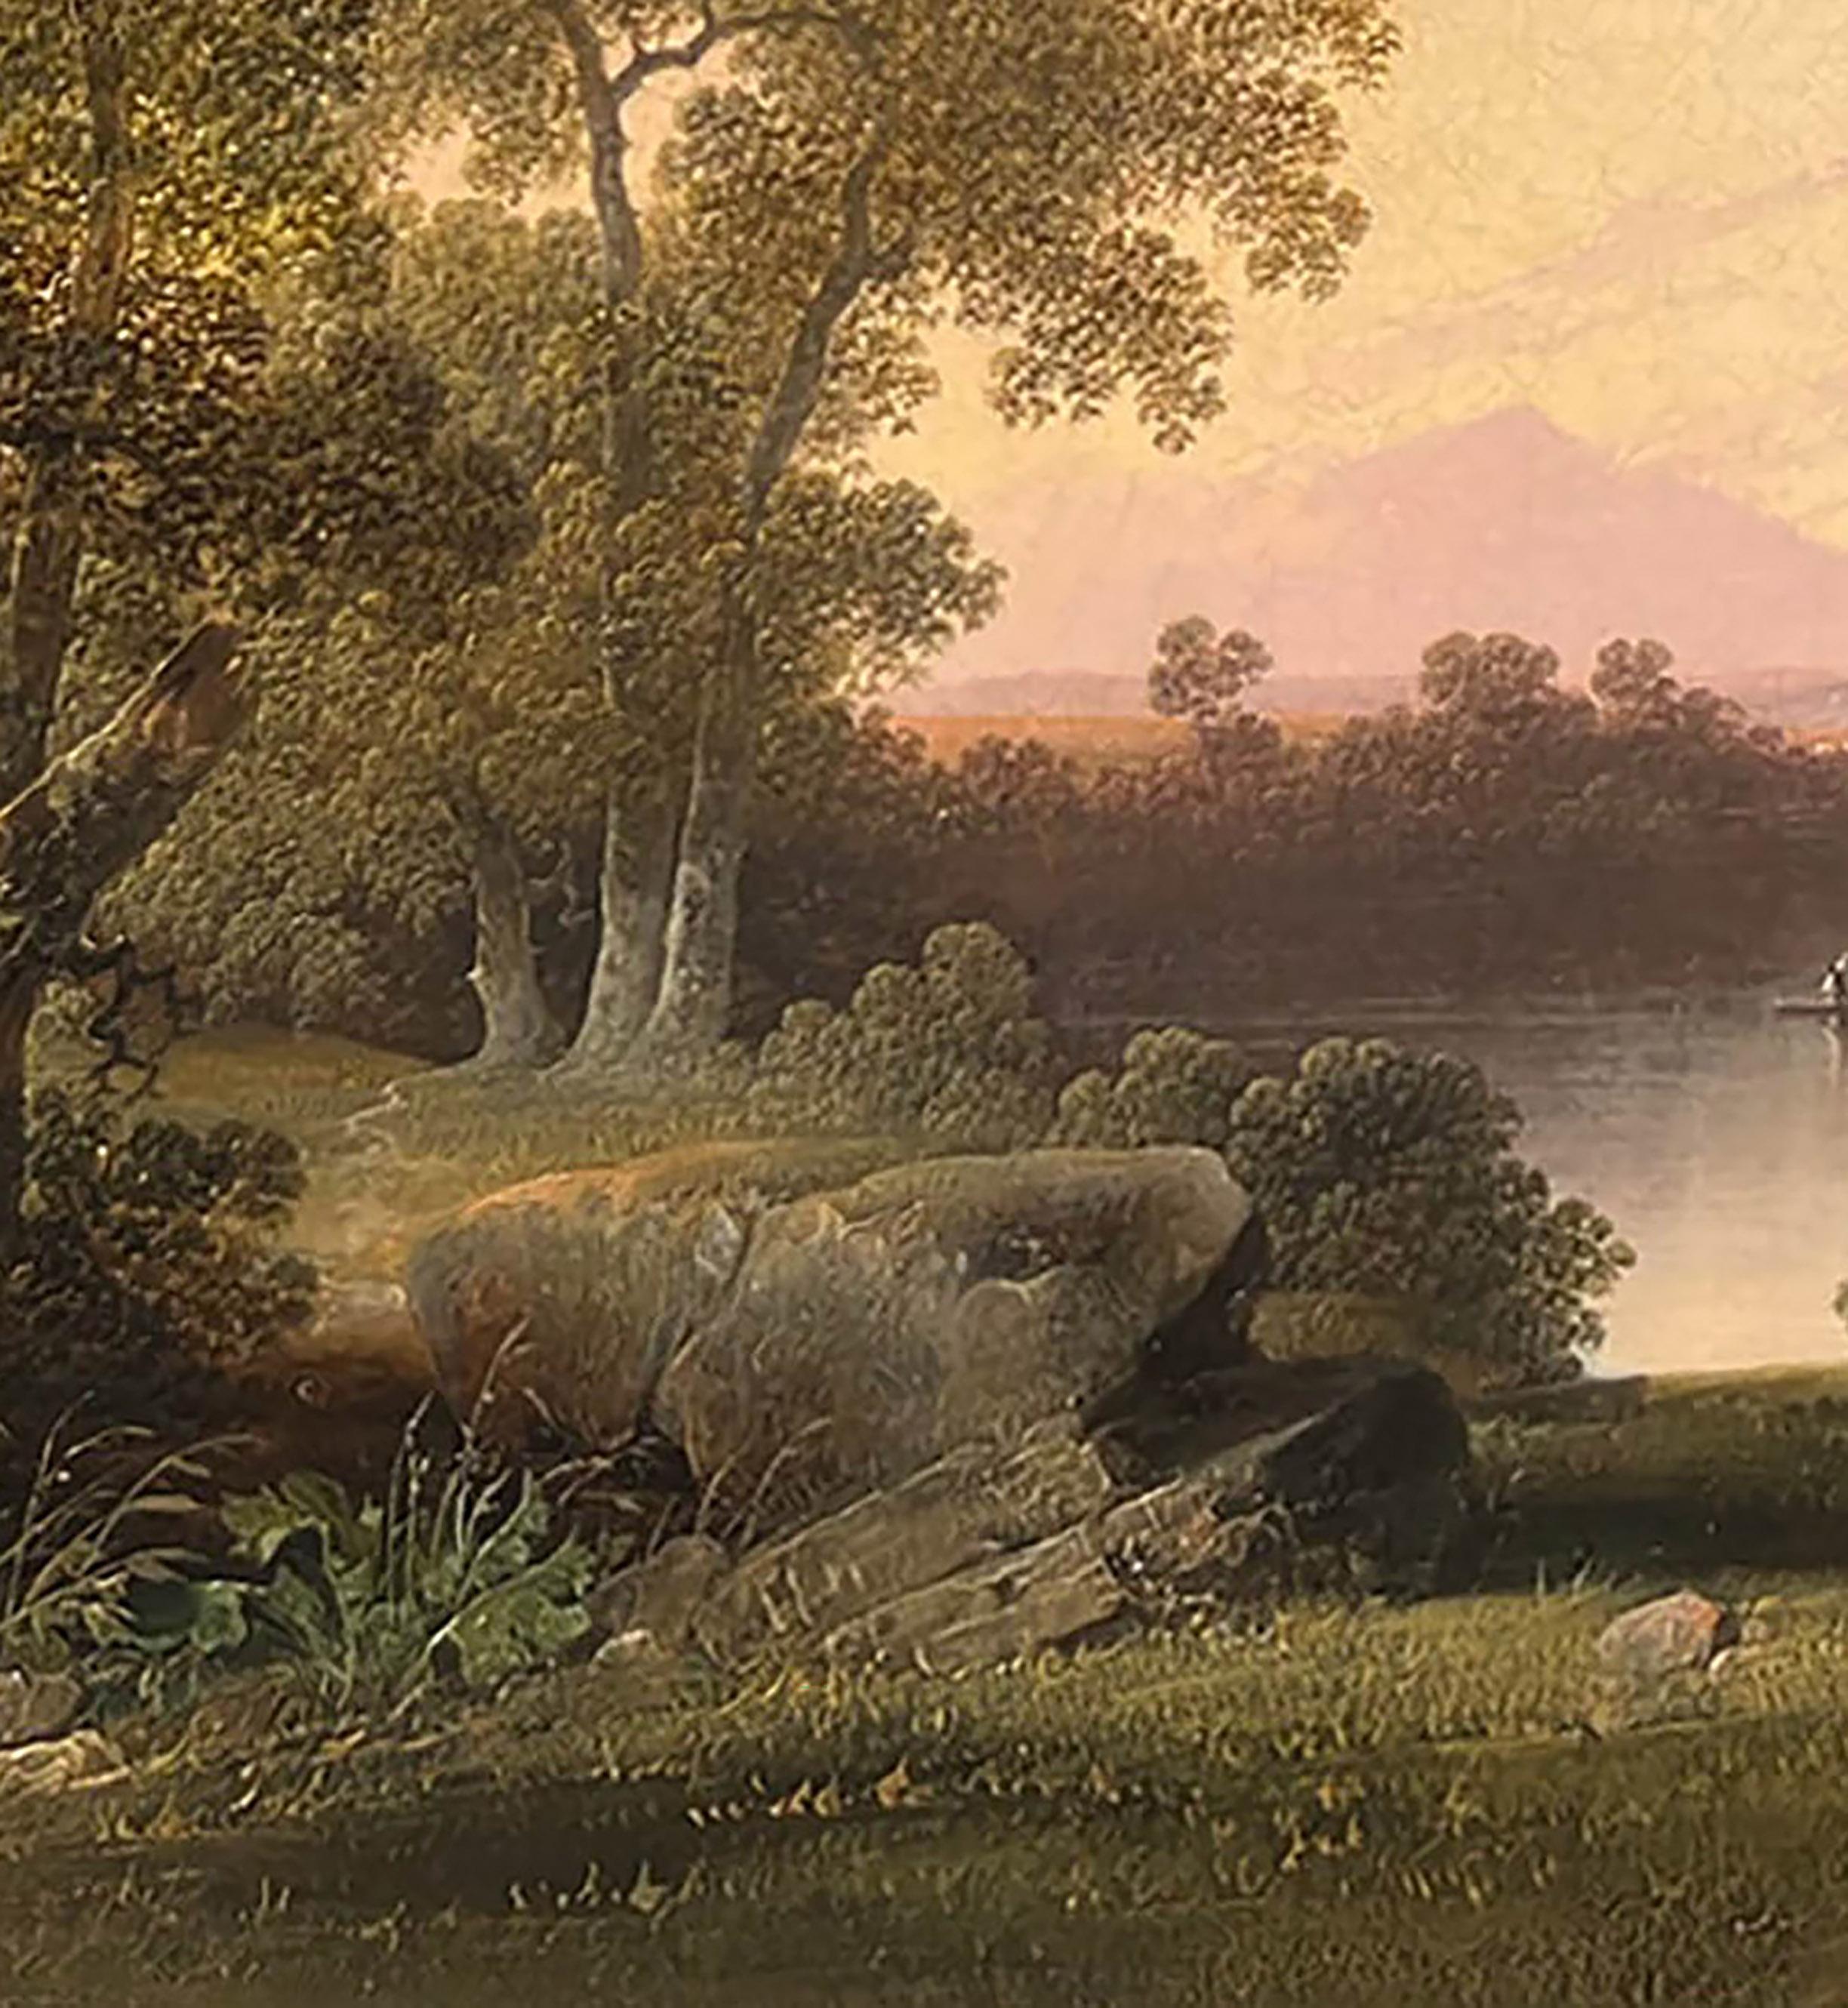 JOSHUA SHAW (1776-1861)
Figures Boating on a Lake
Oil on canvas
14 ½ x 20 inches

English-born Joshua Shaw made significant contributions to the early development of American landscape painting. Not only did he bring the traditions and techniques of